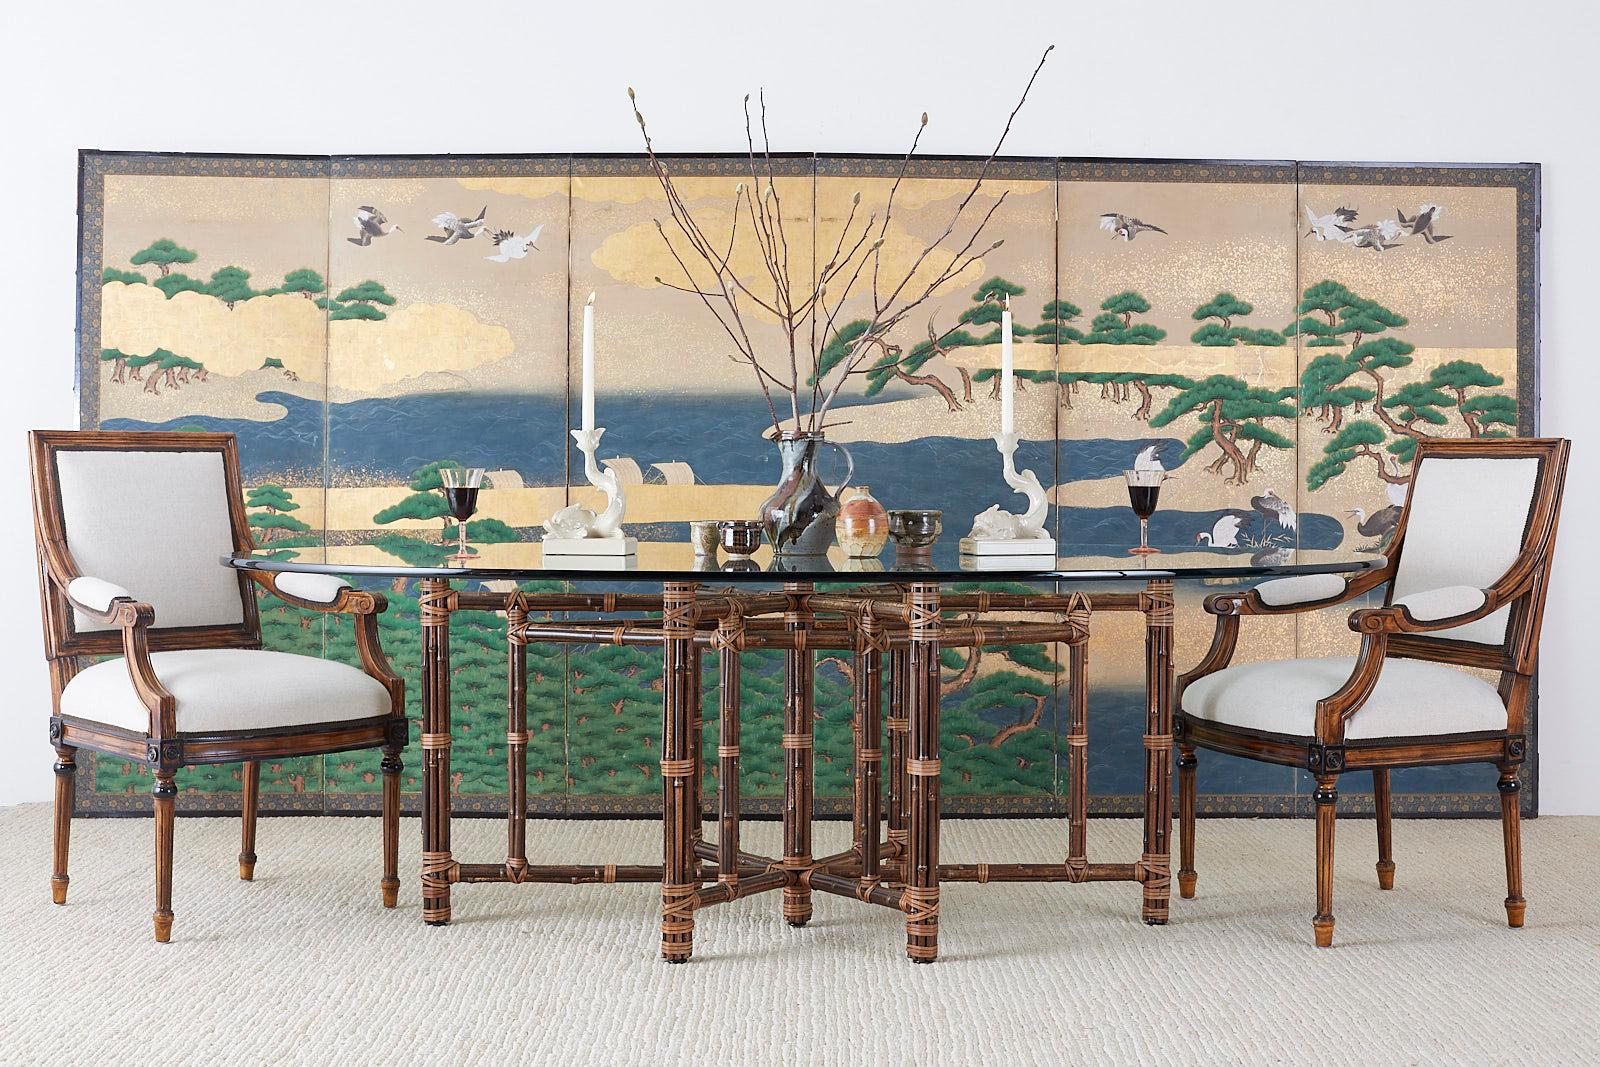 Colorful Japanese late Edo period six-panel screen depicting Hamamatsu sea shore with pine tree groves and cranes. Large format screen ink and color pigments on paper with applied gold leaf and gold flecks. Bountiful blue waves and green foliage